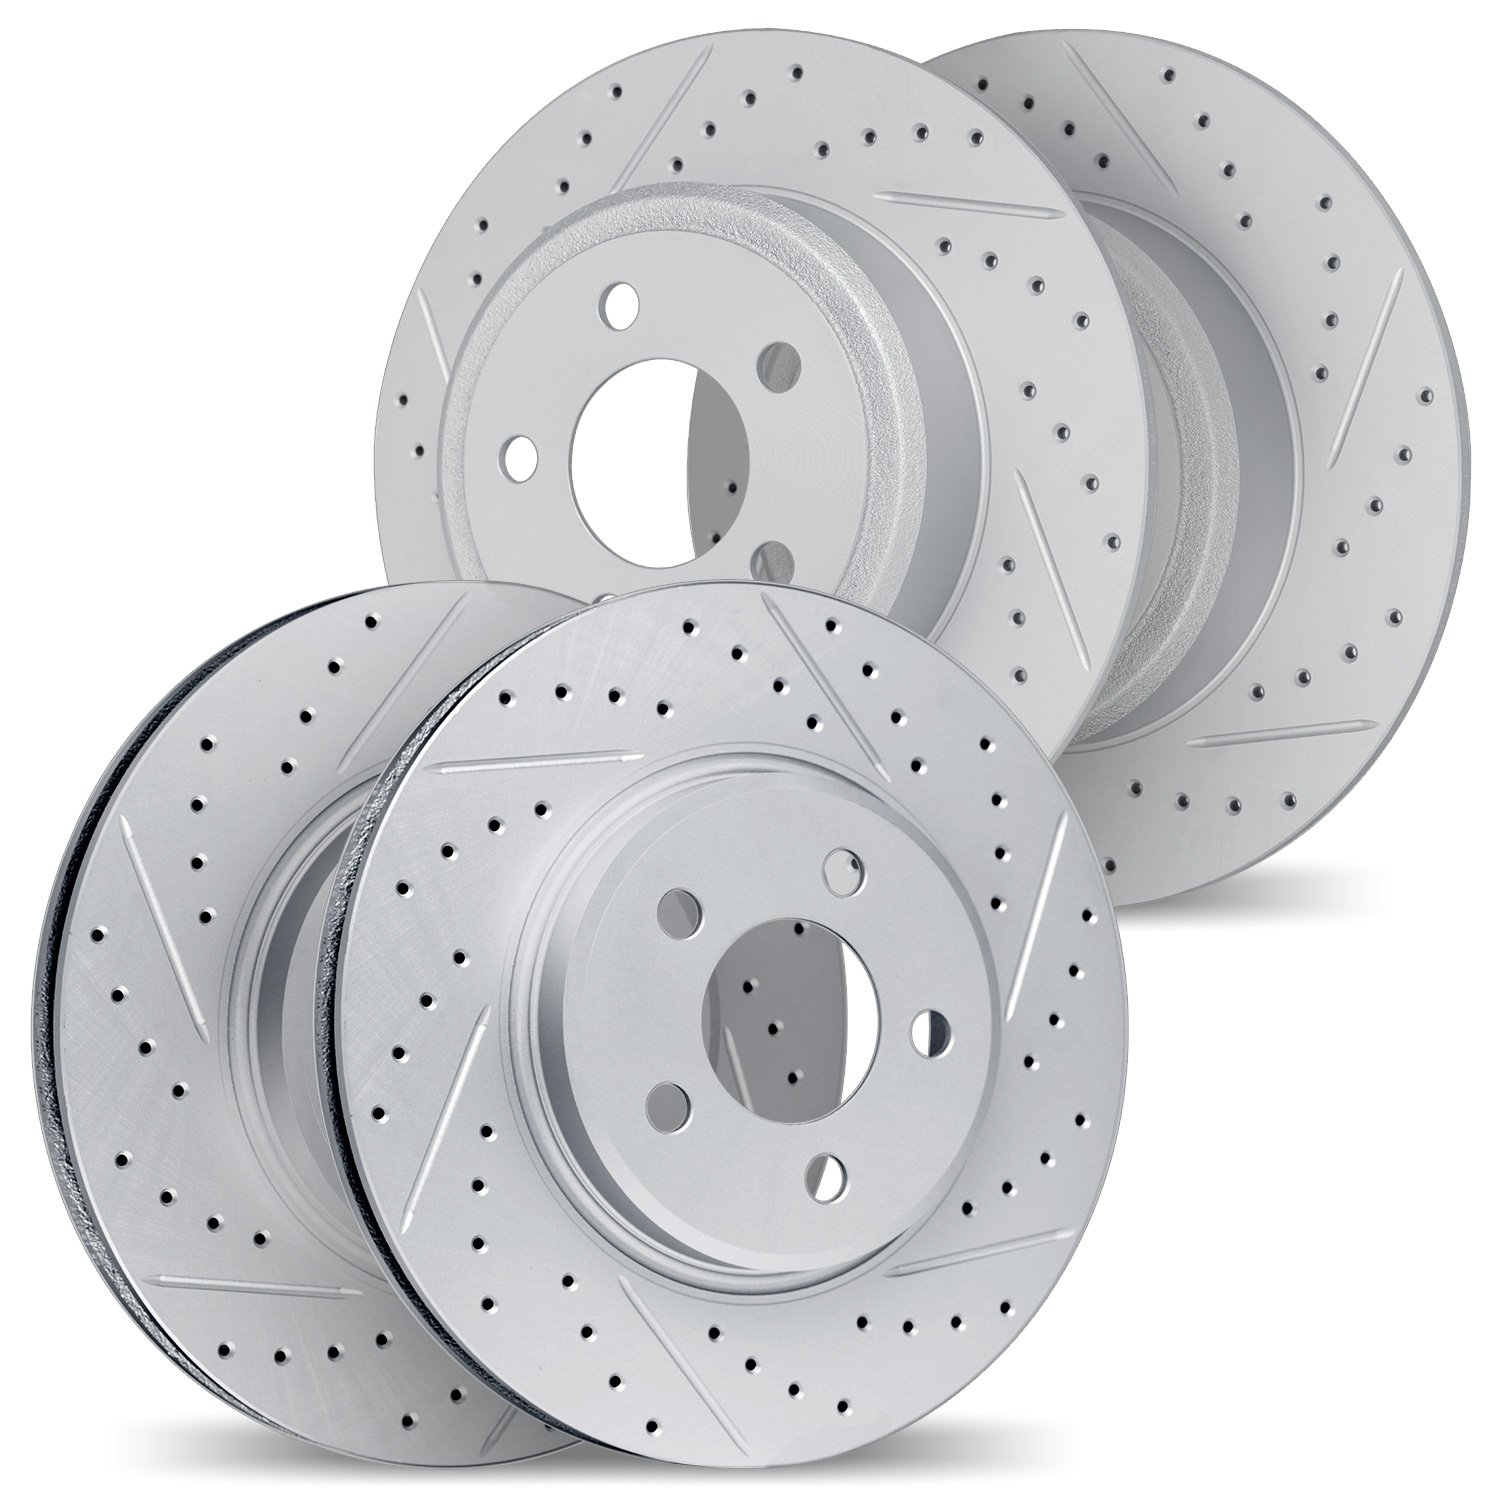 2004-39016 Geoperformance Drilled/Slotted Brake Rotors, 2004-2005 Mopar, Position: Front and Rear